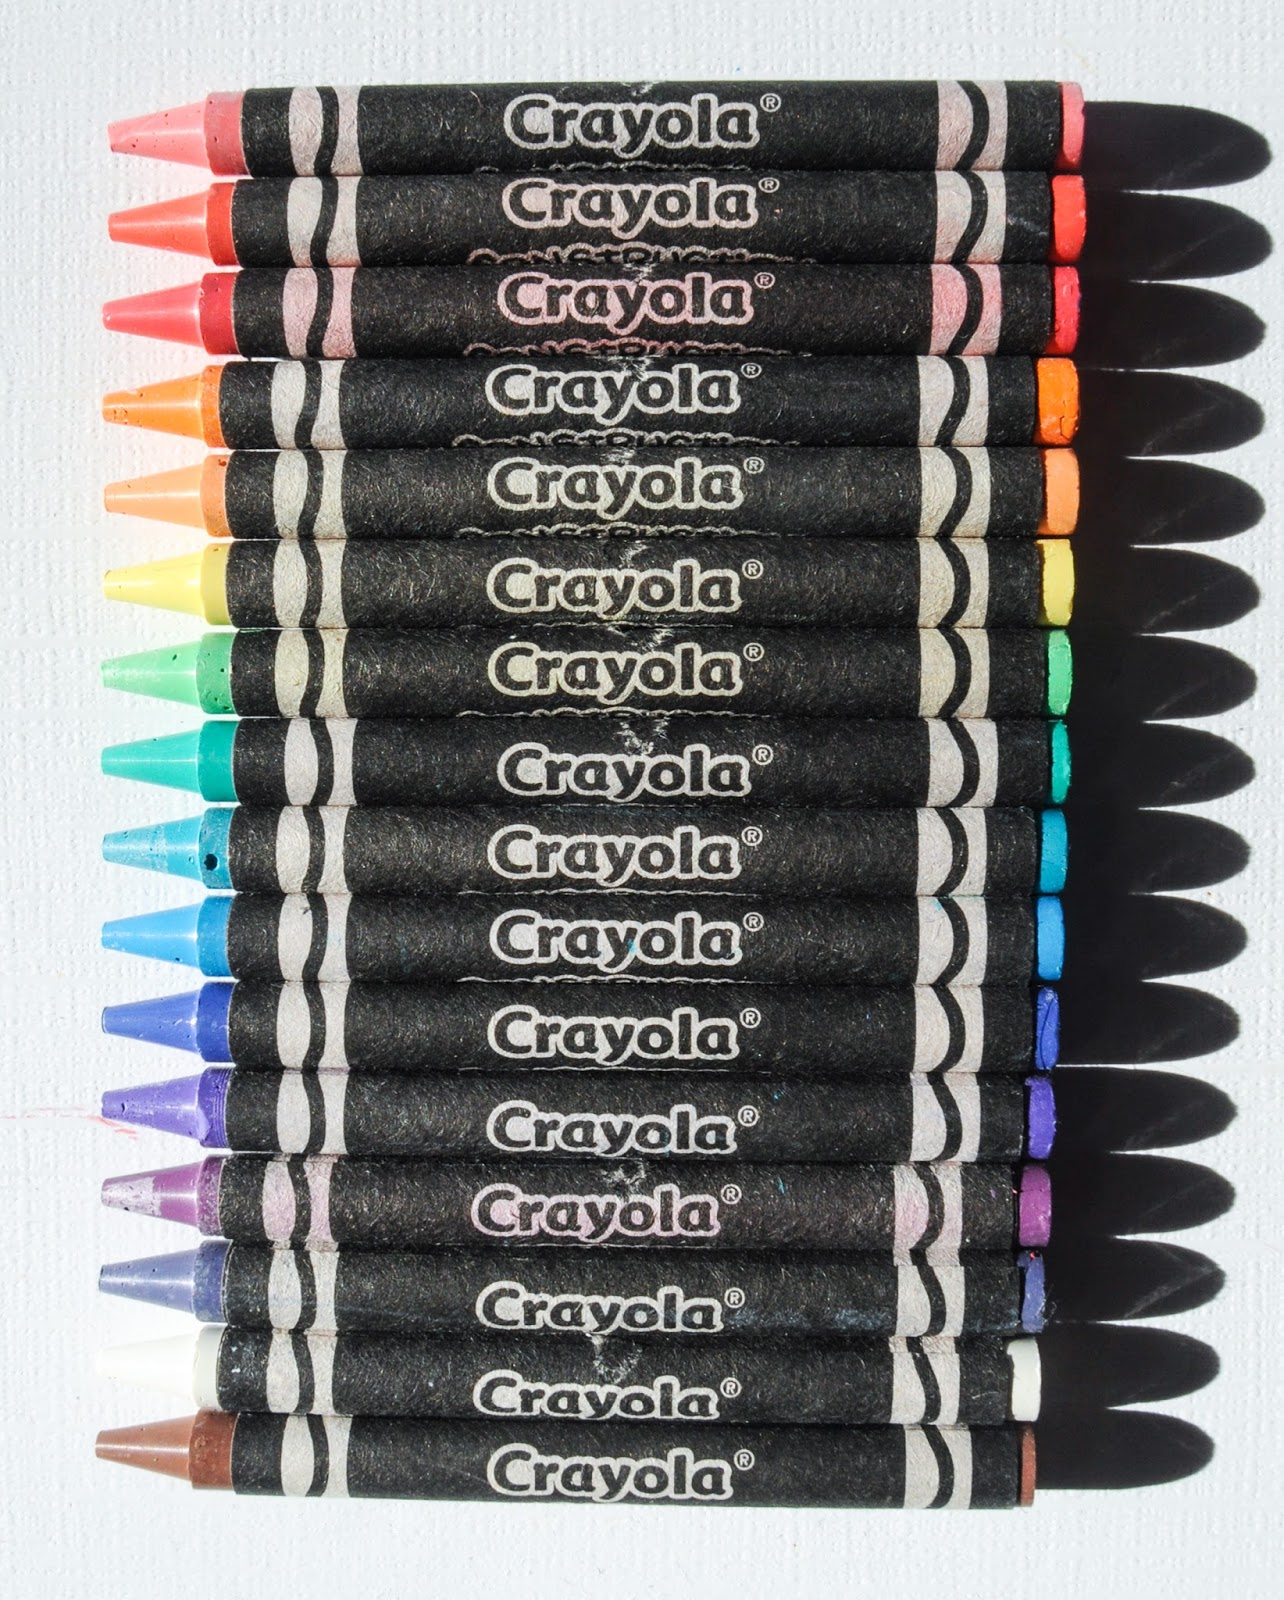 Crayola Construction Paper Crayons Assorted Colors Set of 16 